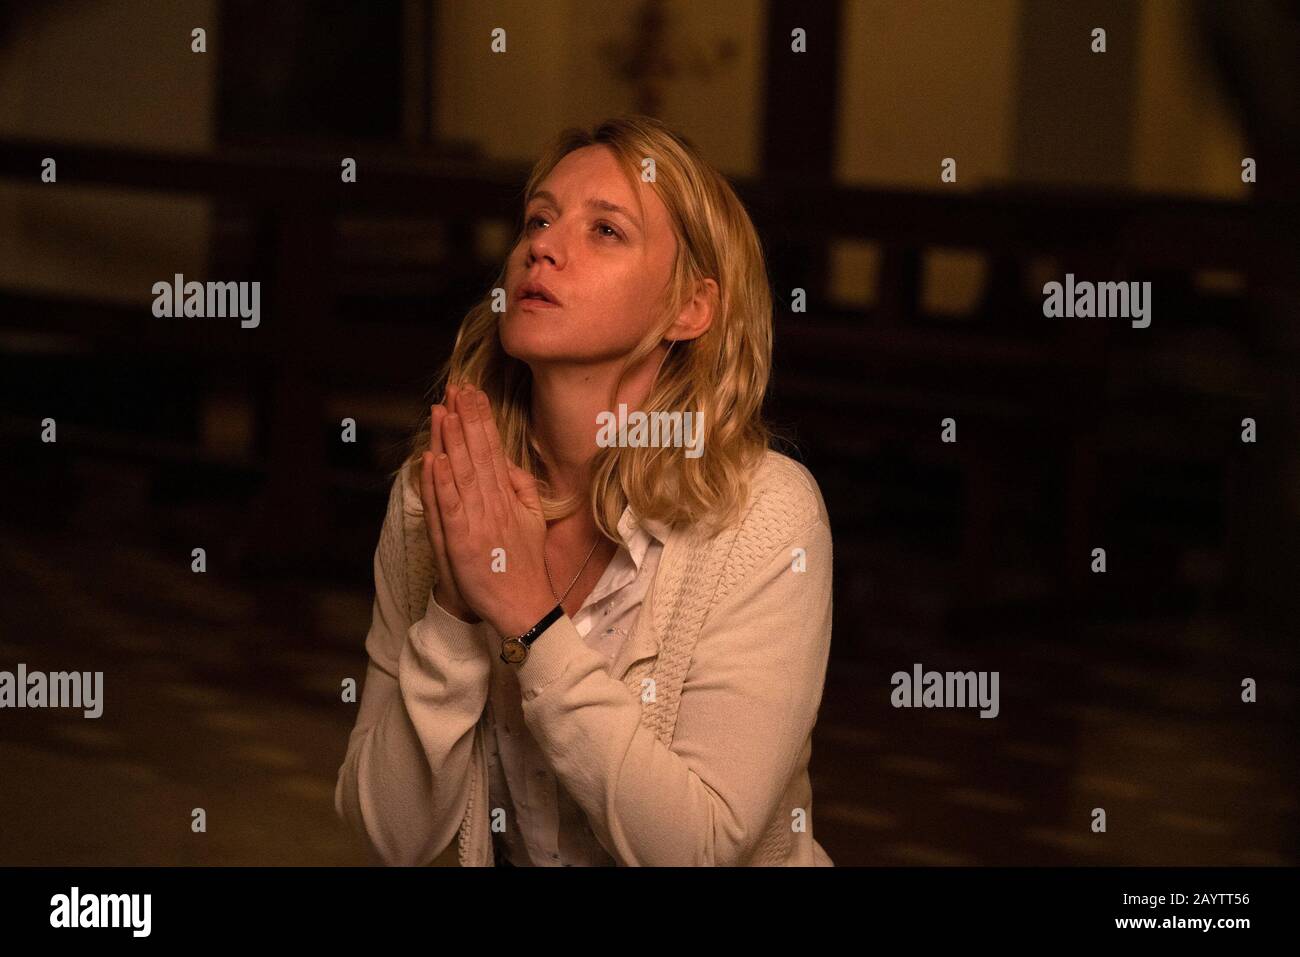 LUDIVINE SAGNIER in THE NEW (2020), directed by PAOLO SORRENTINO. / Album Stock Photo Alamy